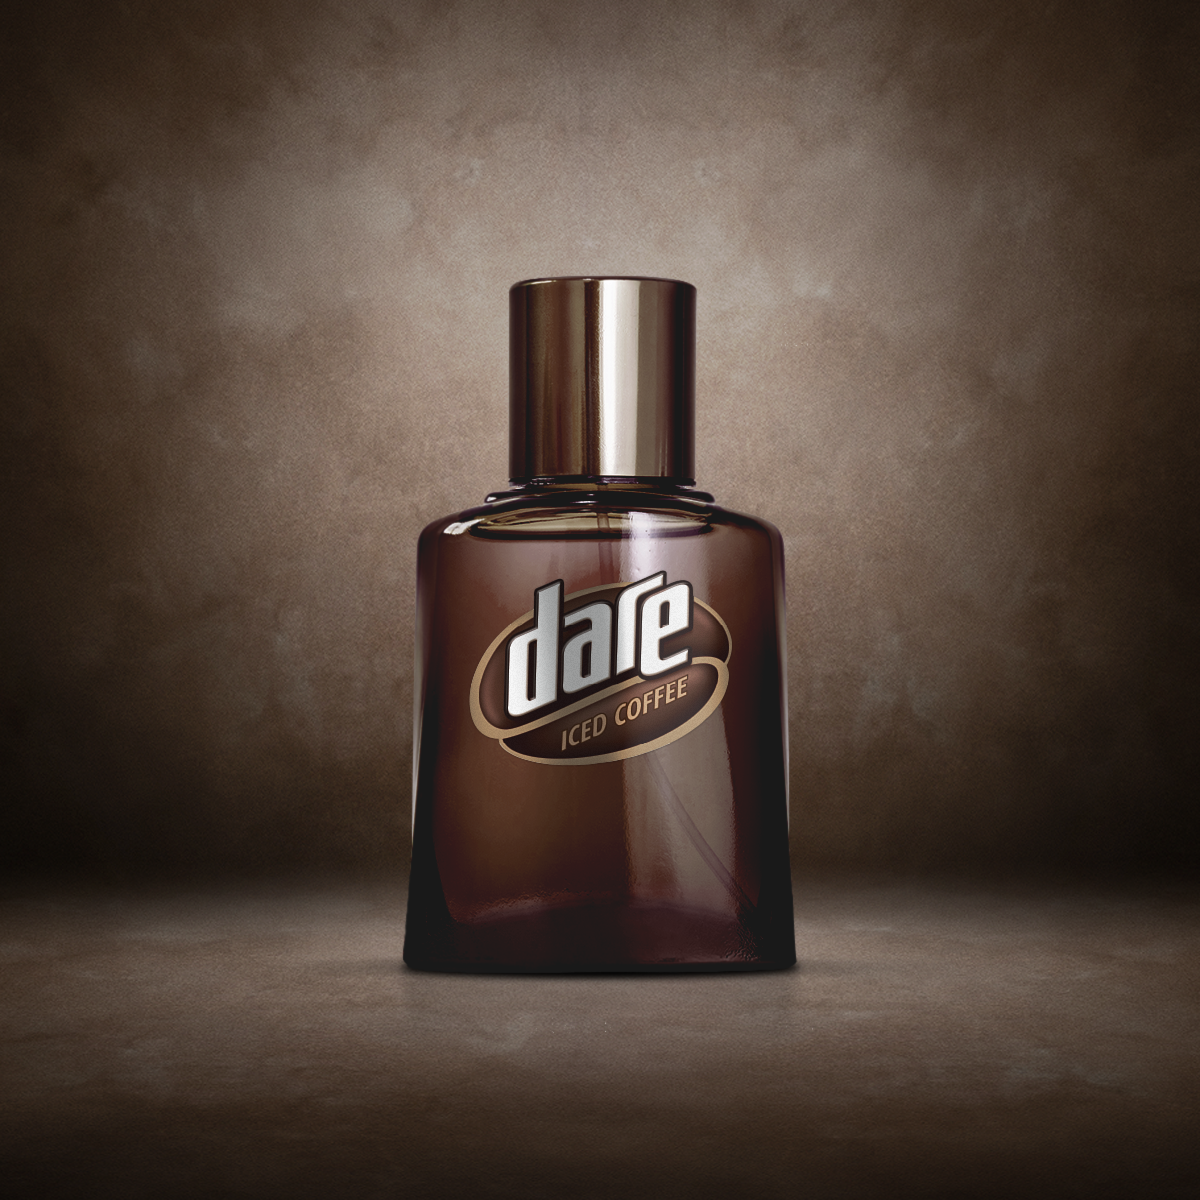 Dare Cologne. 60% of the time, it works everytime.